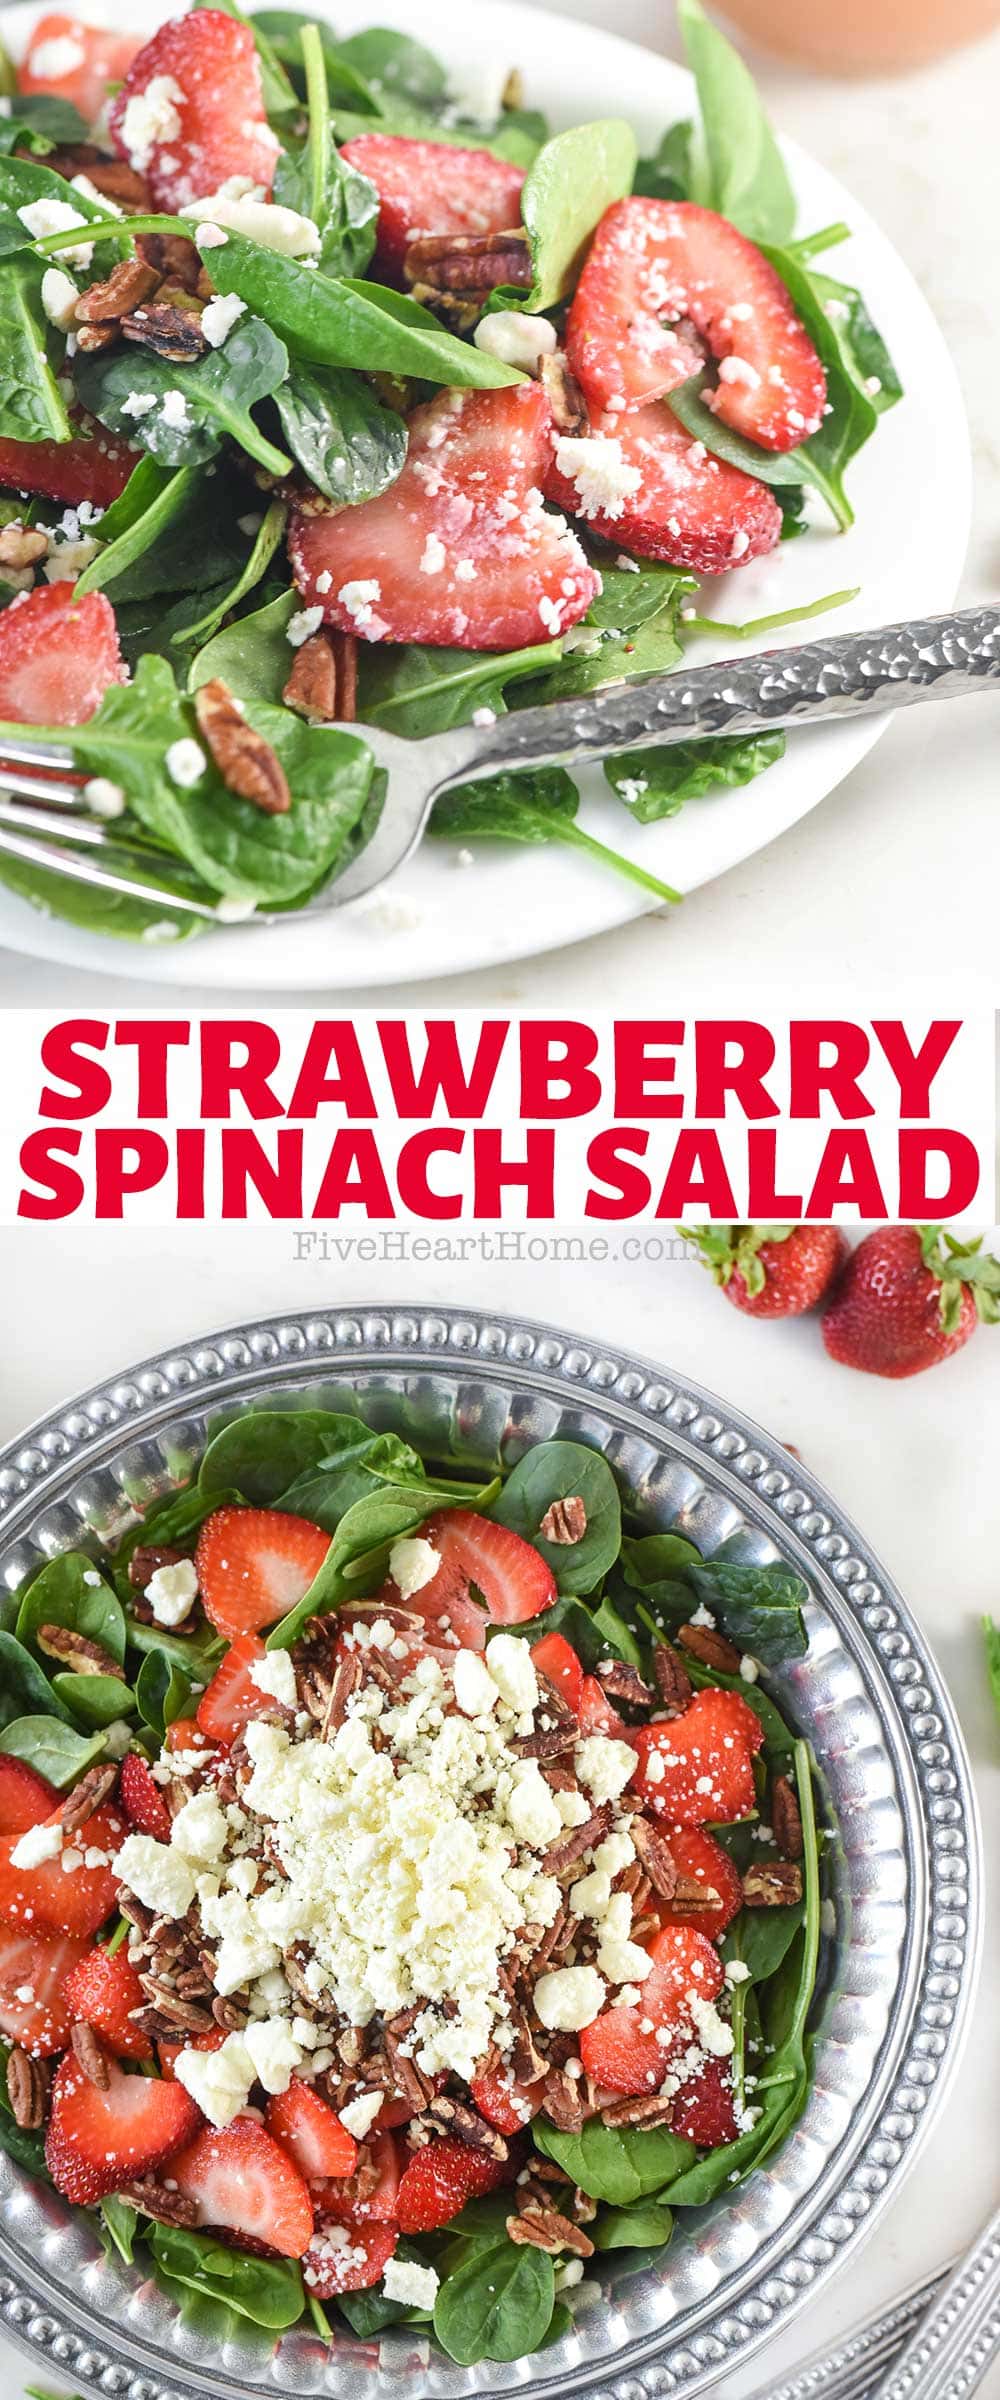 The BEST Strawberry Spinach Salad ~ this fresh, vibrant, delicious salad is enhanced by toasted pecans, creamy feta, and an amazing homemade blush wine vinaigrette! | FiveHeartHome.com via @fivehearthome